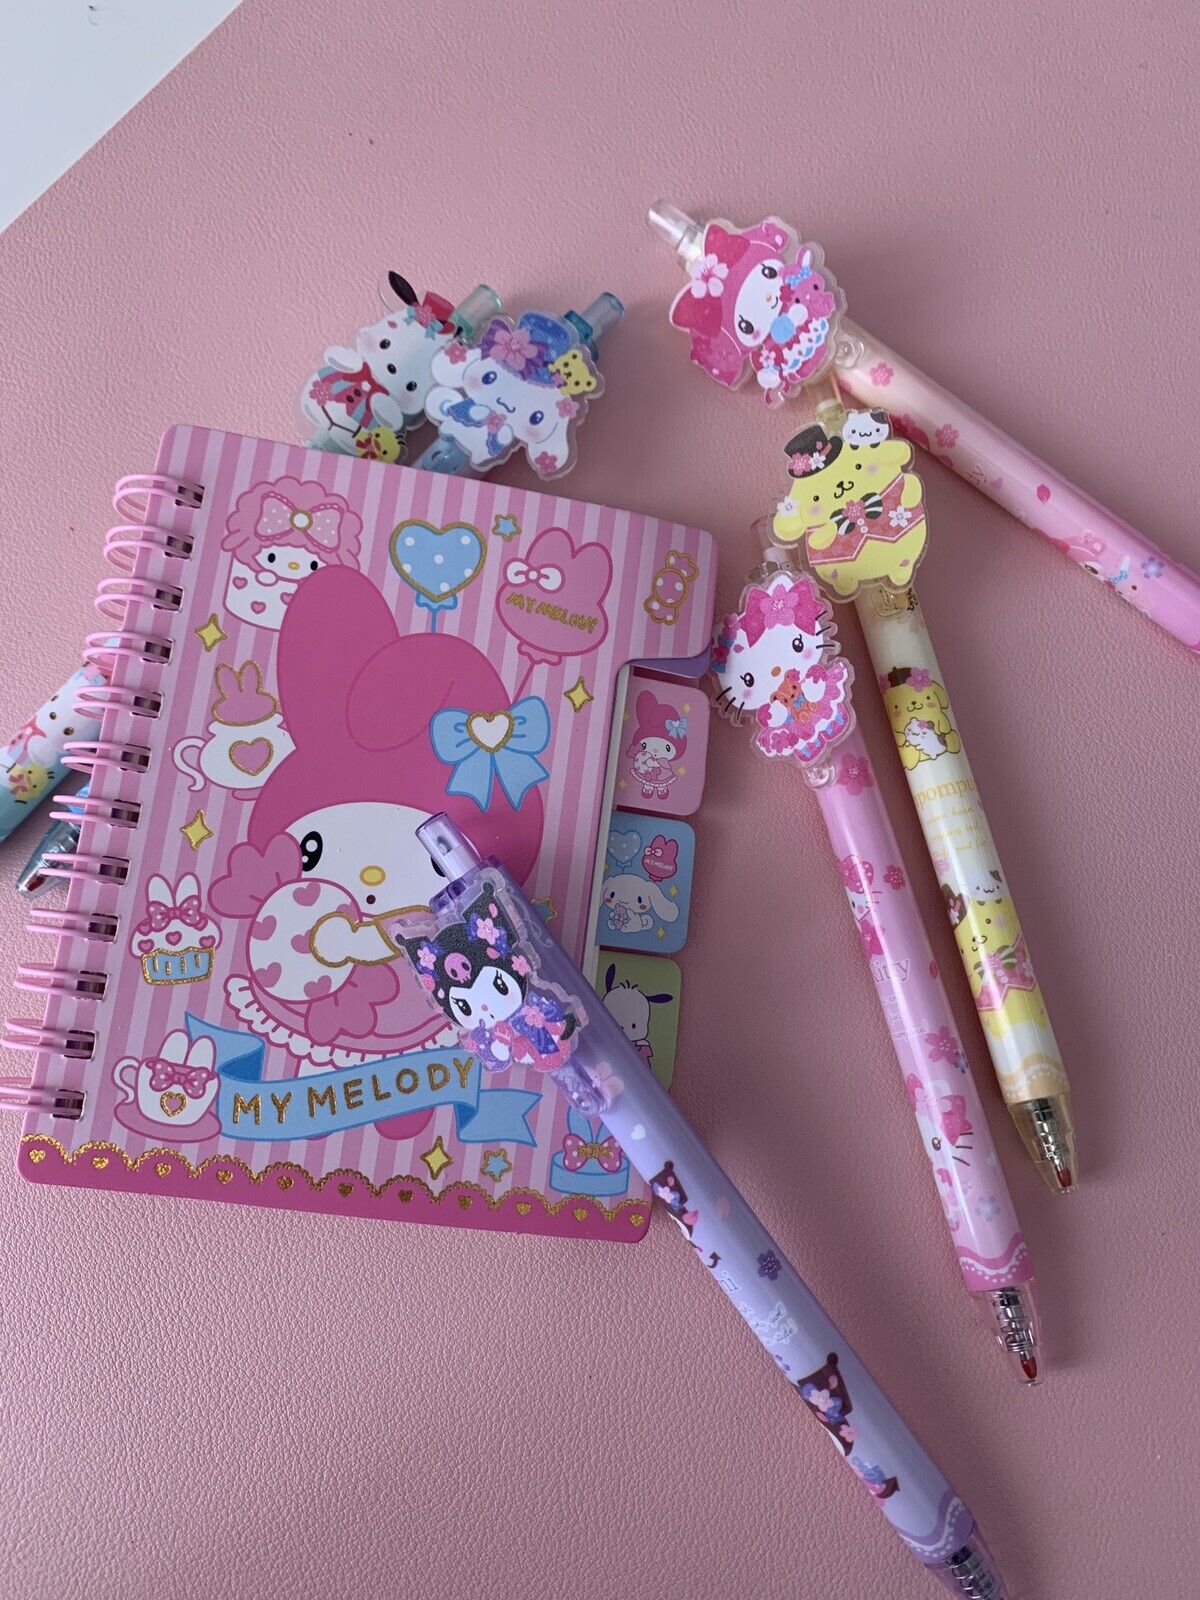 New Sanrio Cute Stationery Set, Pack With 6 Pens + Mini My Melody Notebook 